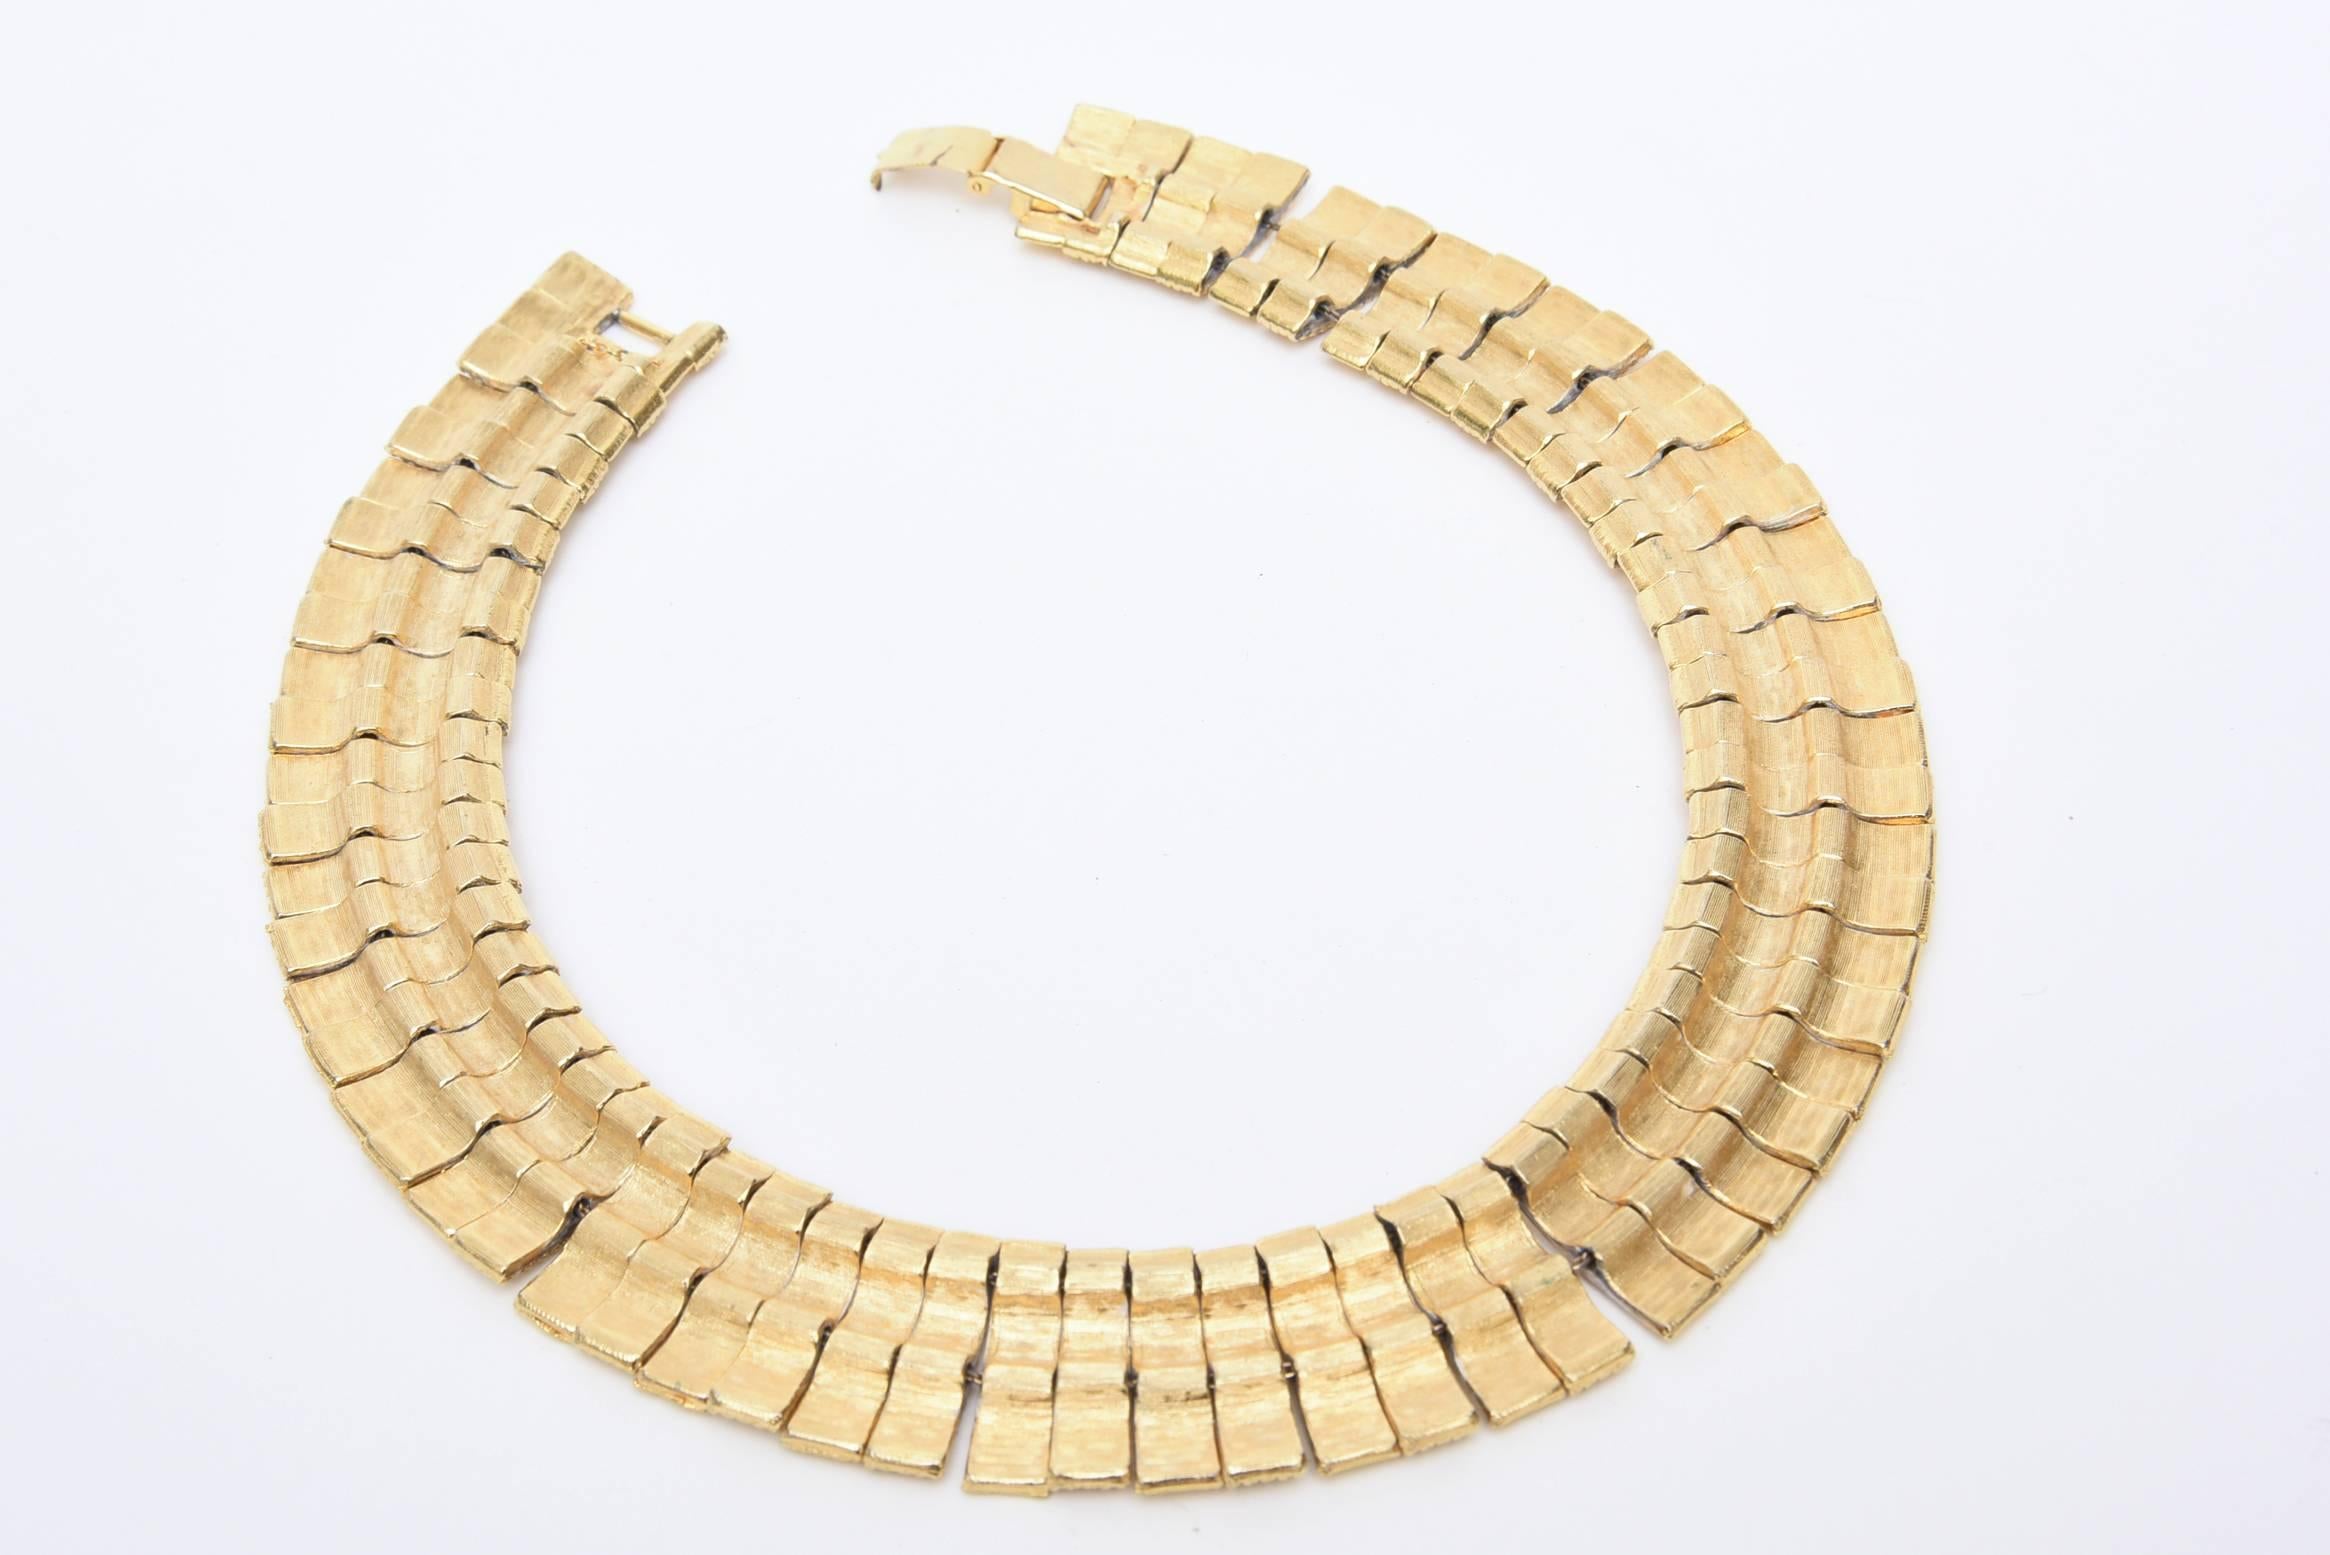 Textural Reticulated Gold Plated Collar Necklace Vintage For Sale 1